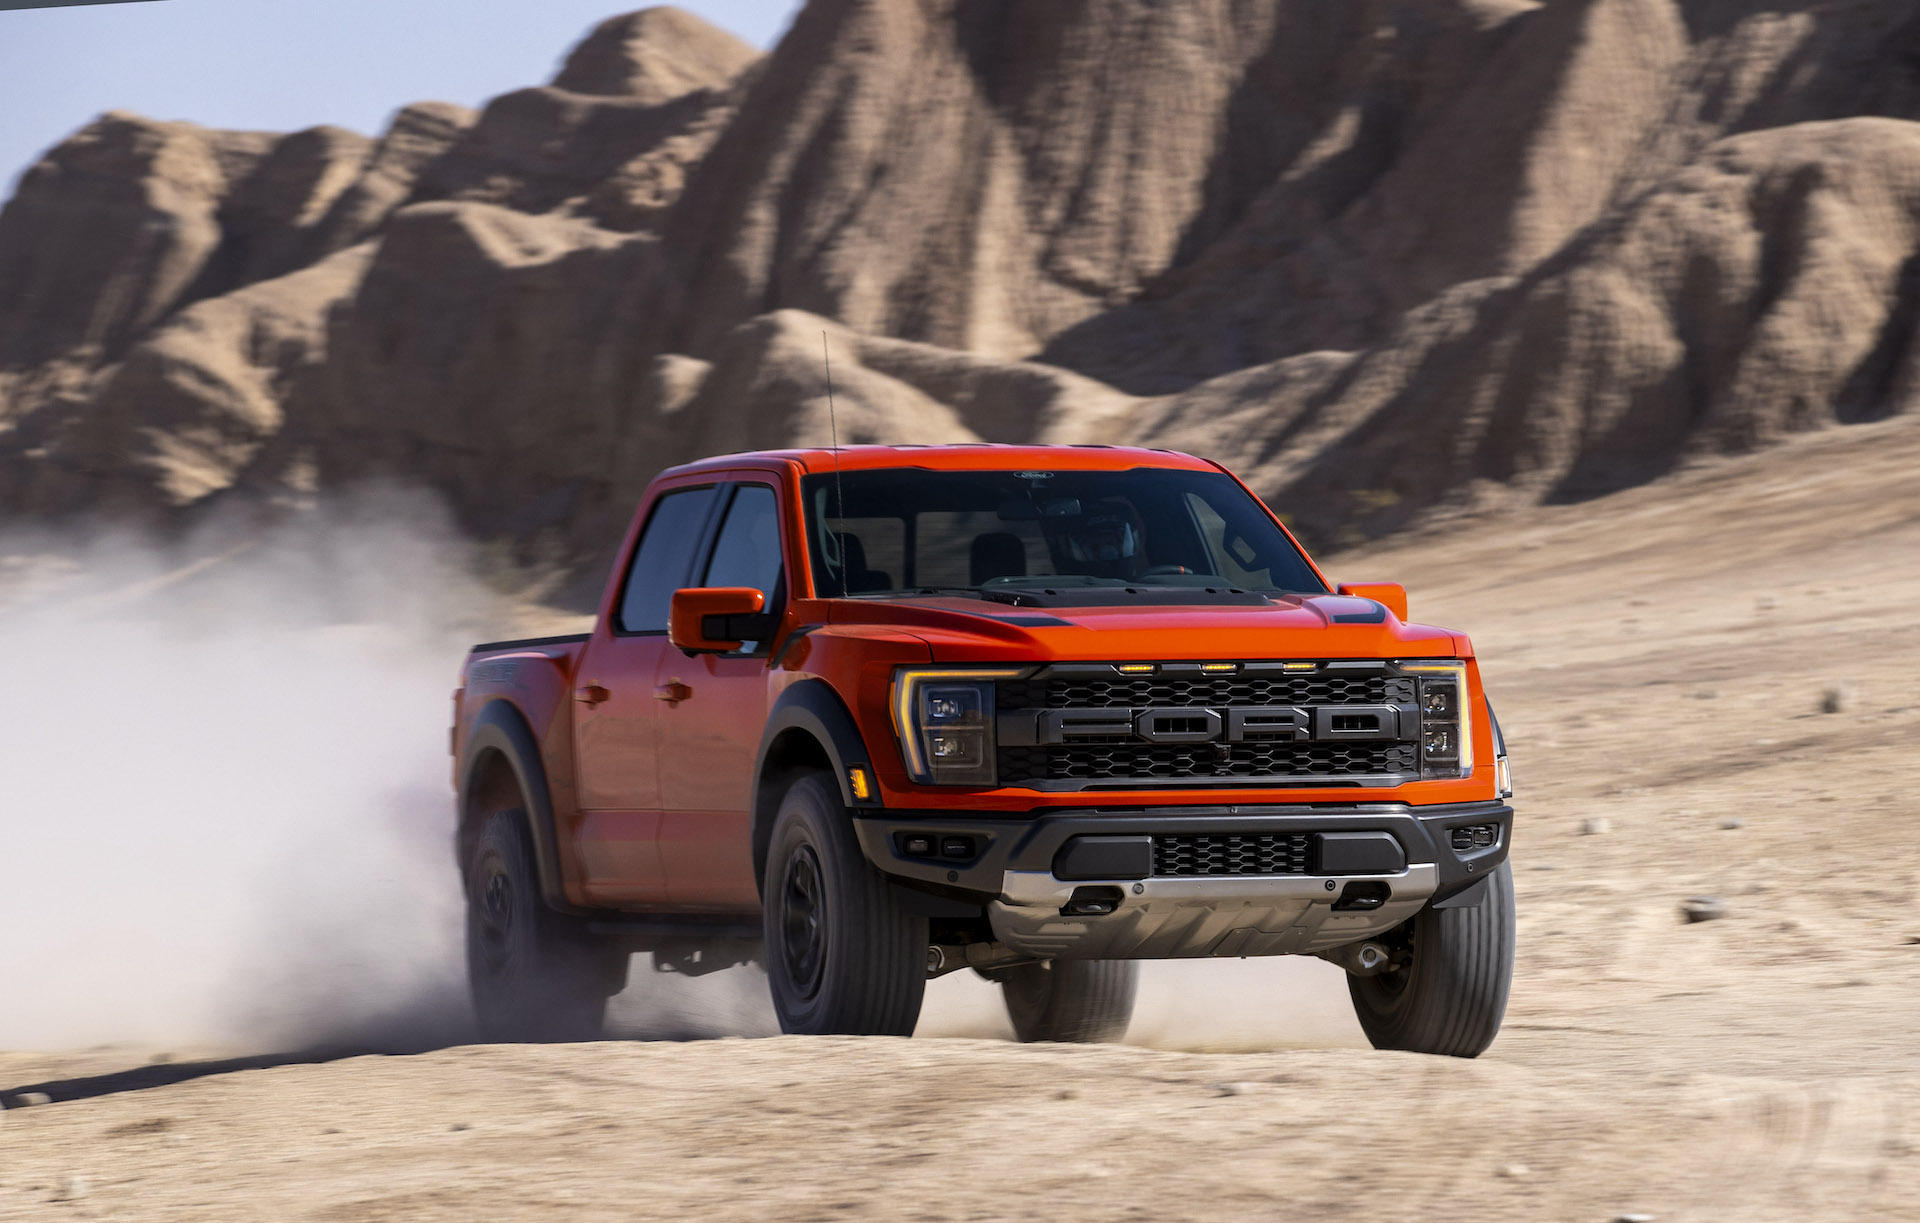 An image of the 2021 Ford F-150 Raptor in the desert.